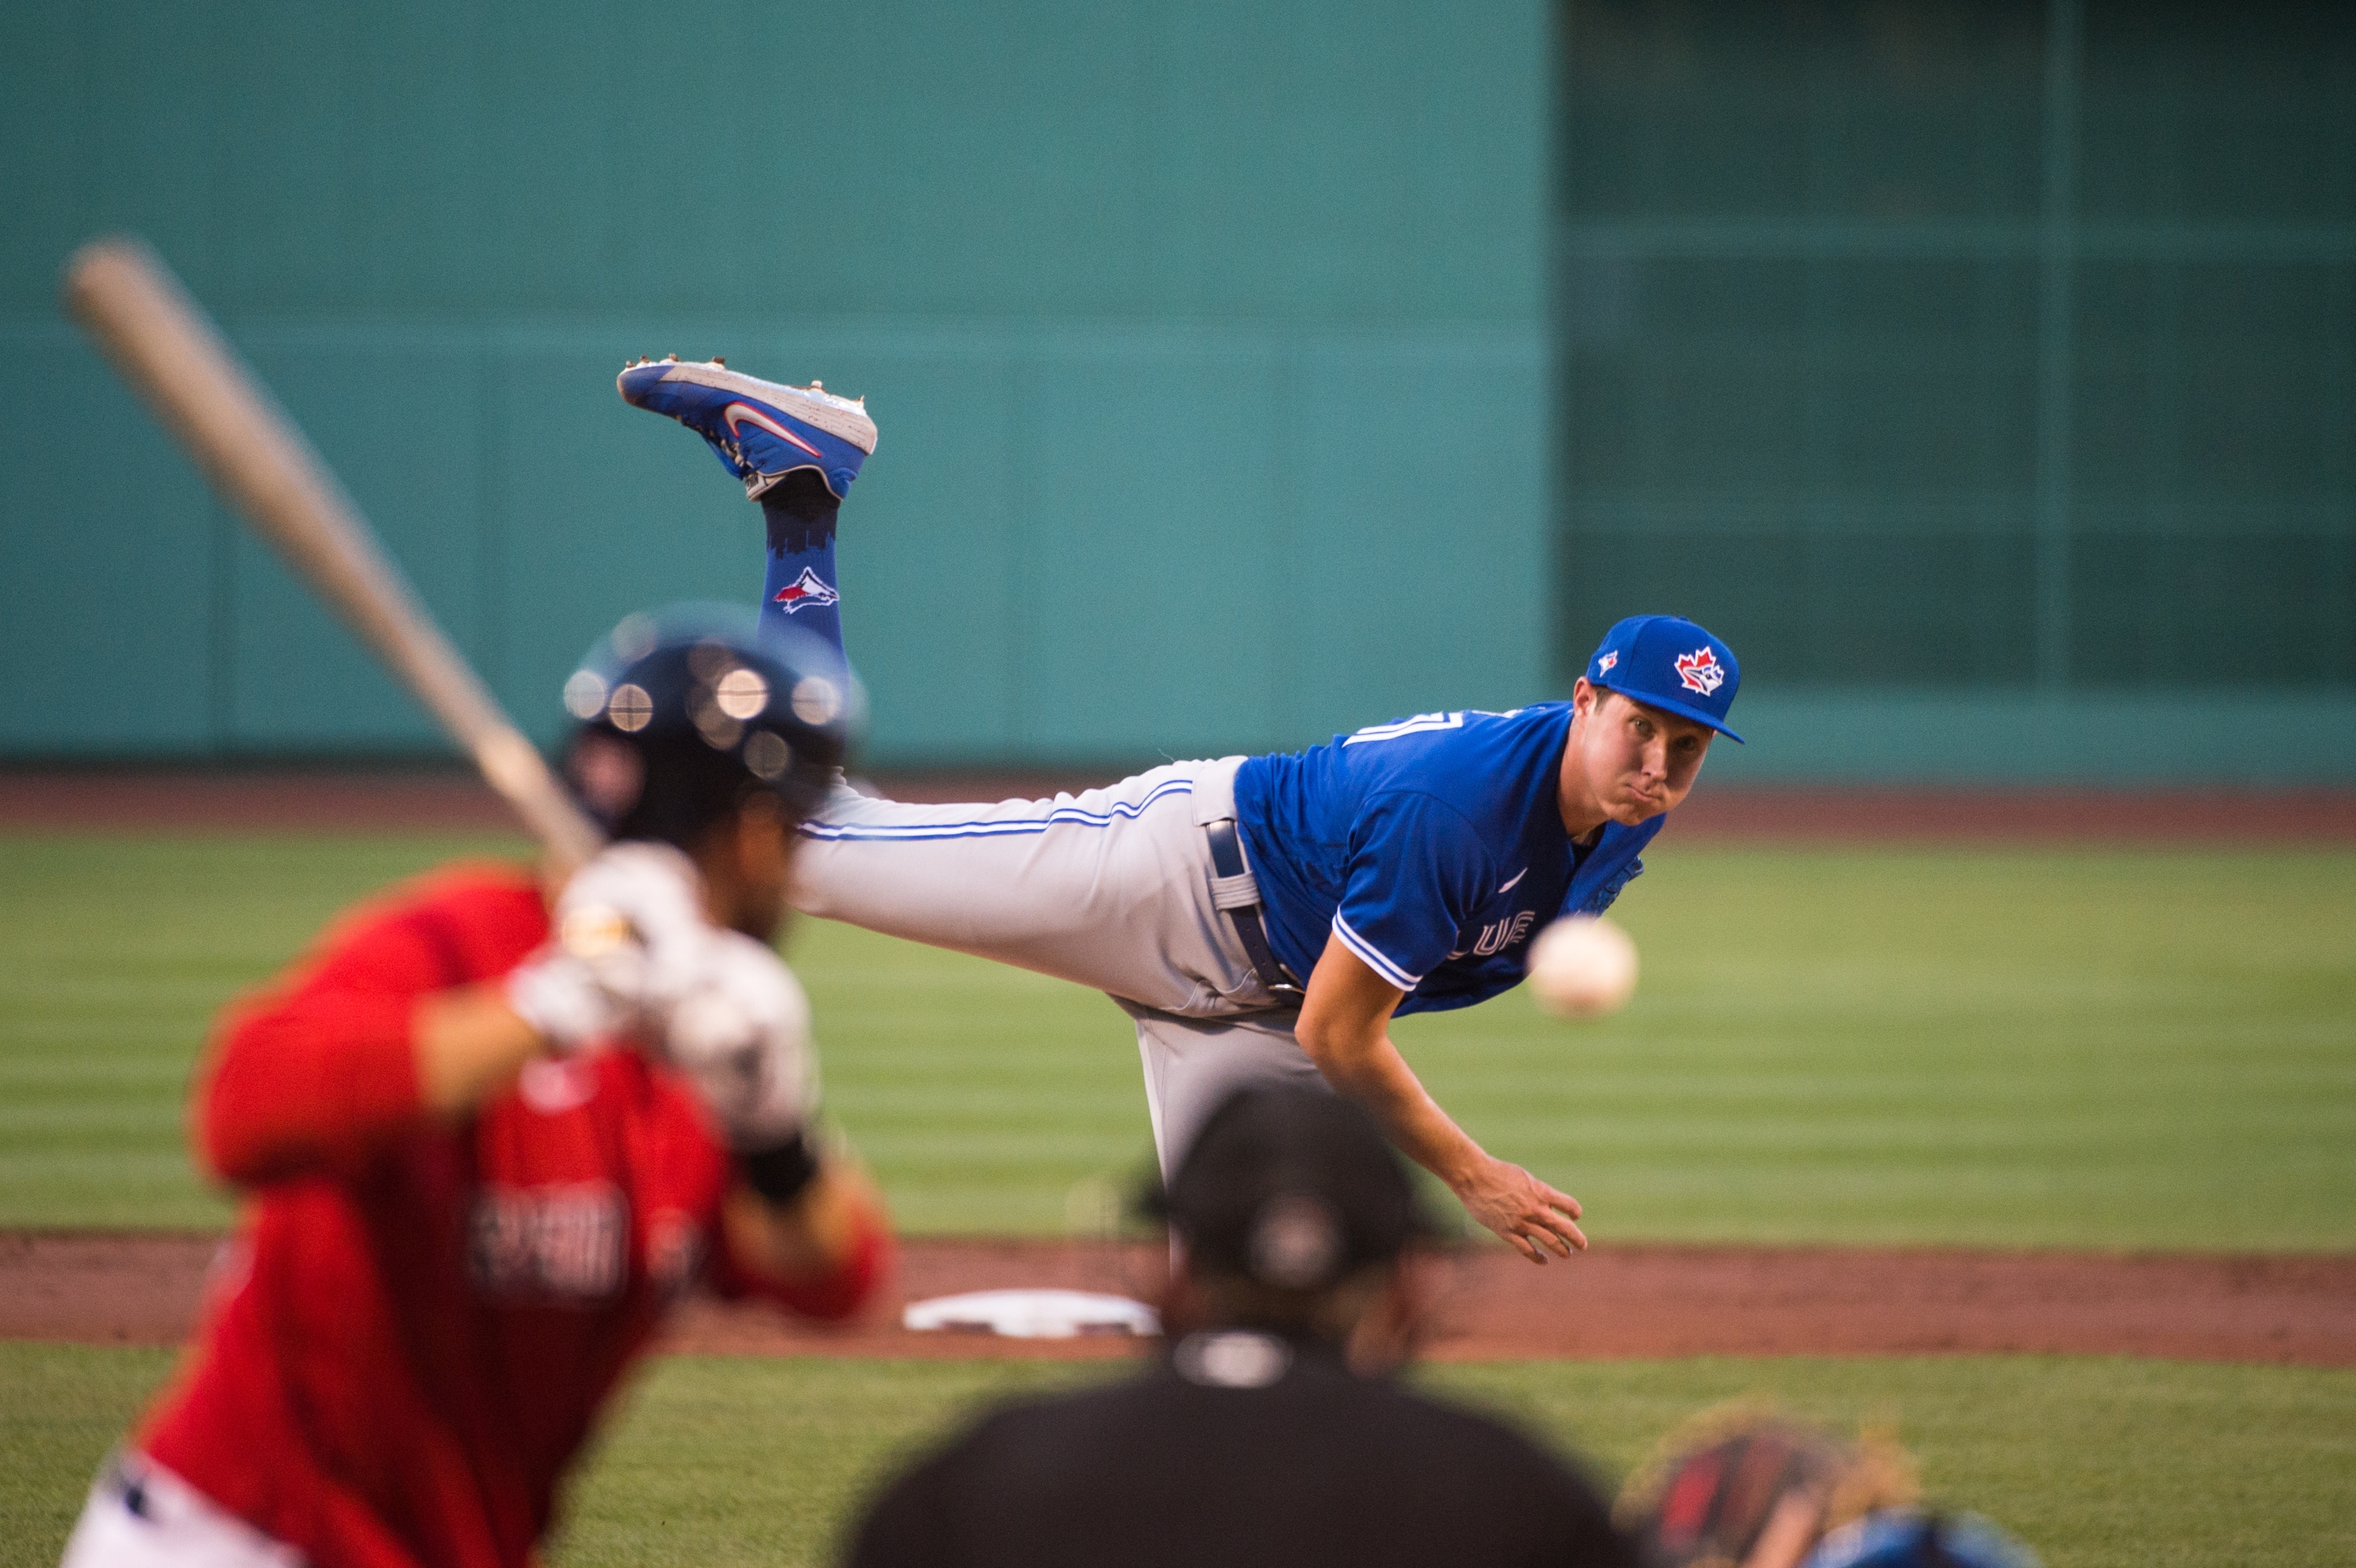 Nerves get to Pearson early but Blue Jays rookie shows flashes of Great Nate  at Fenway